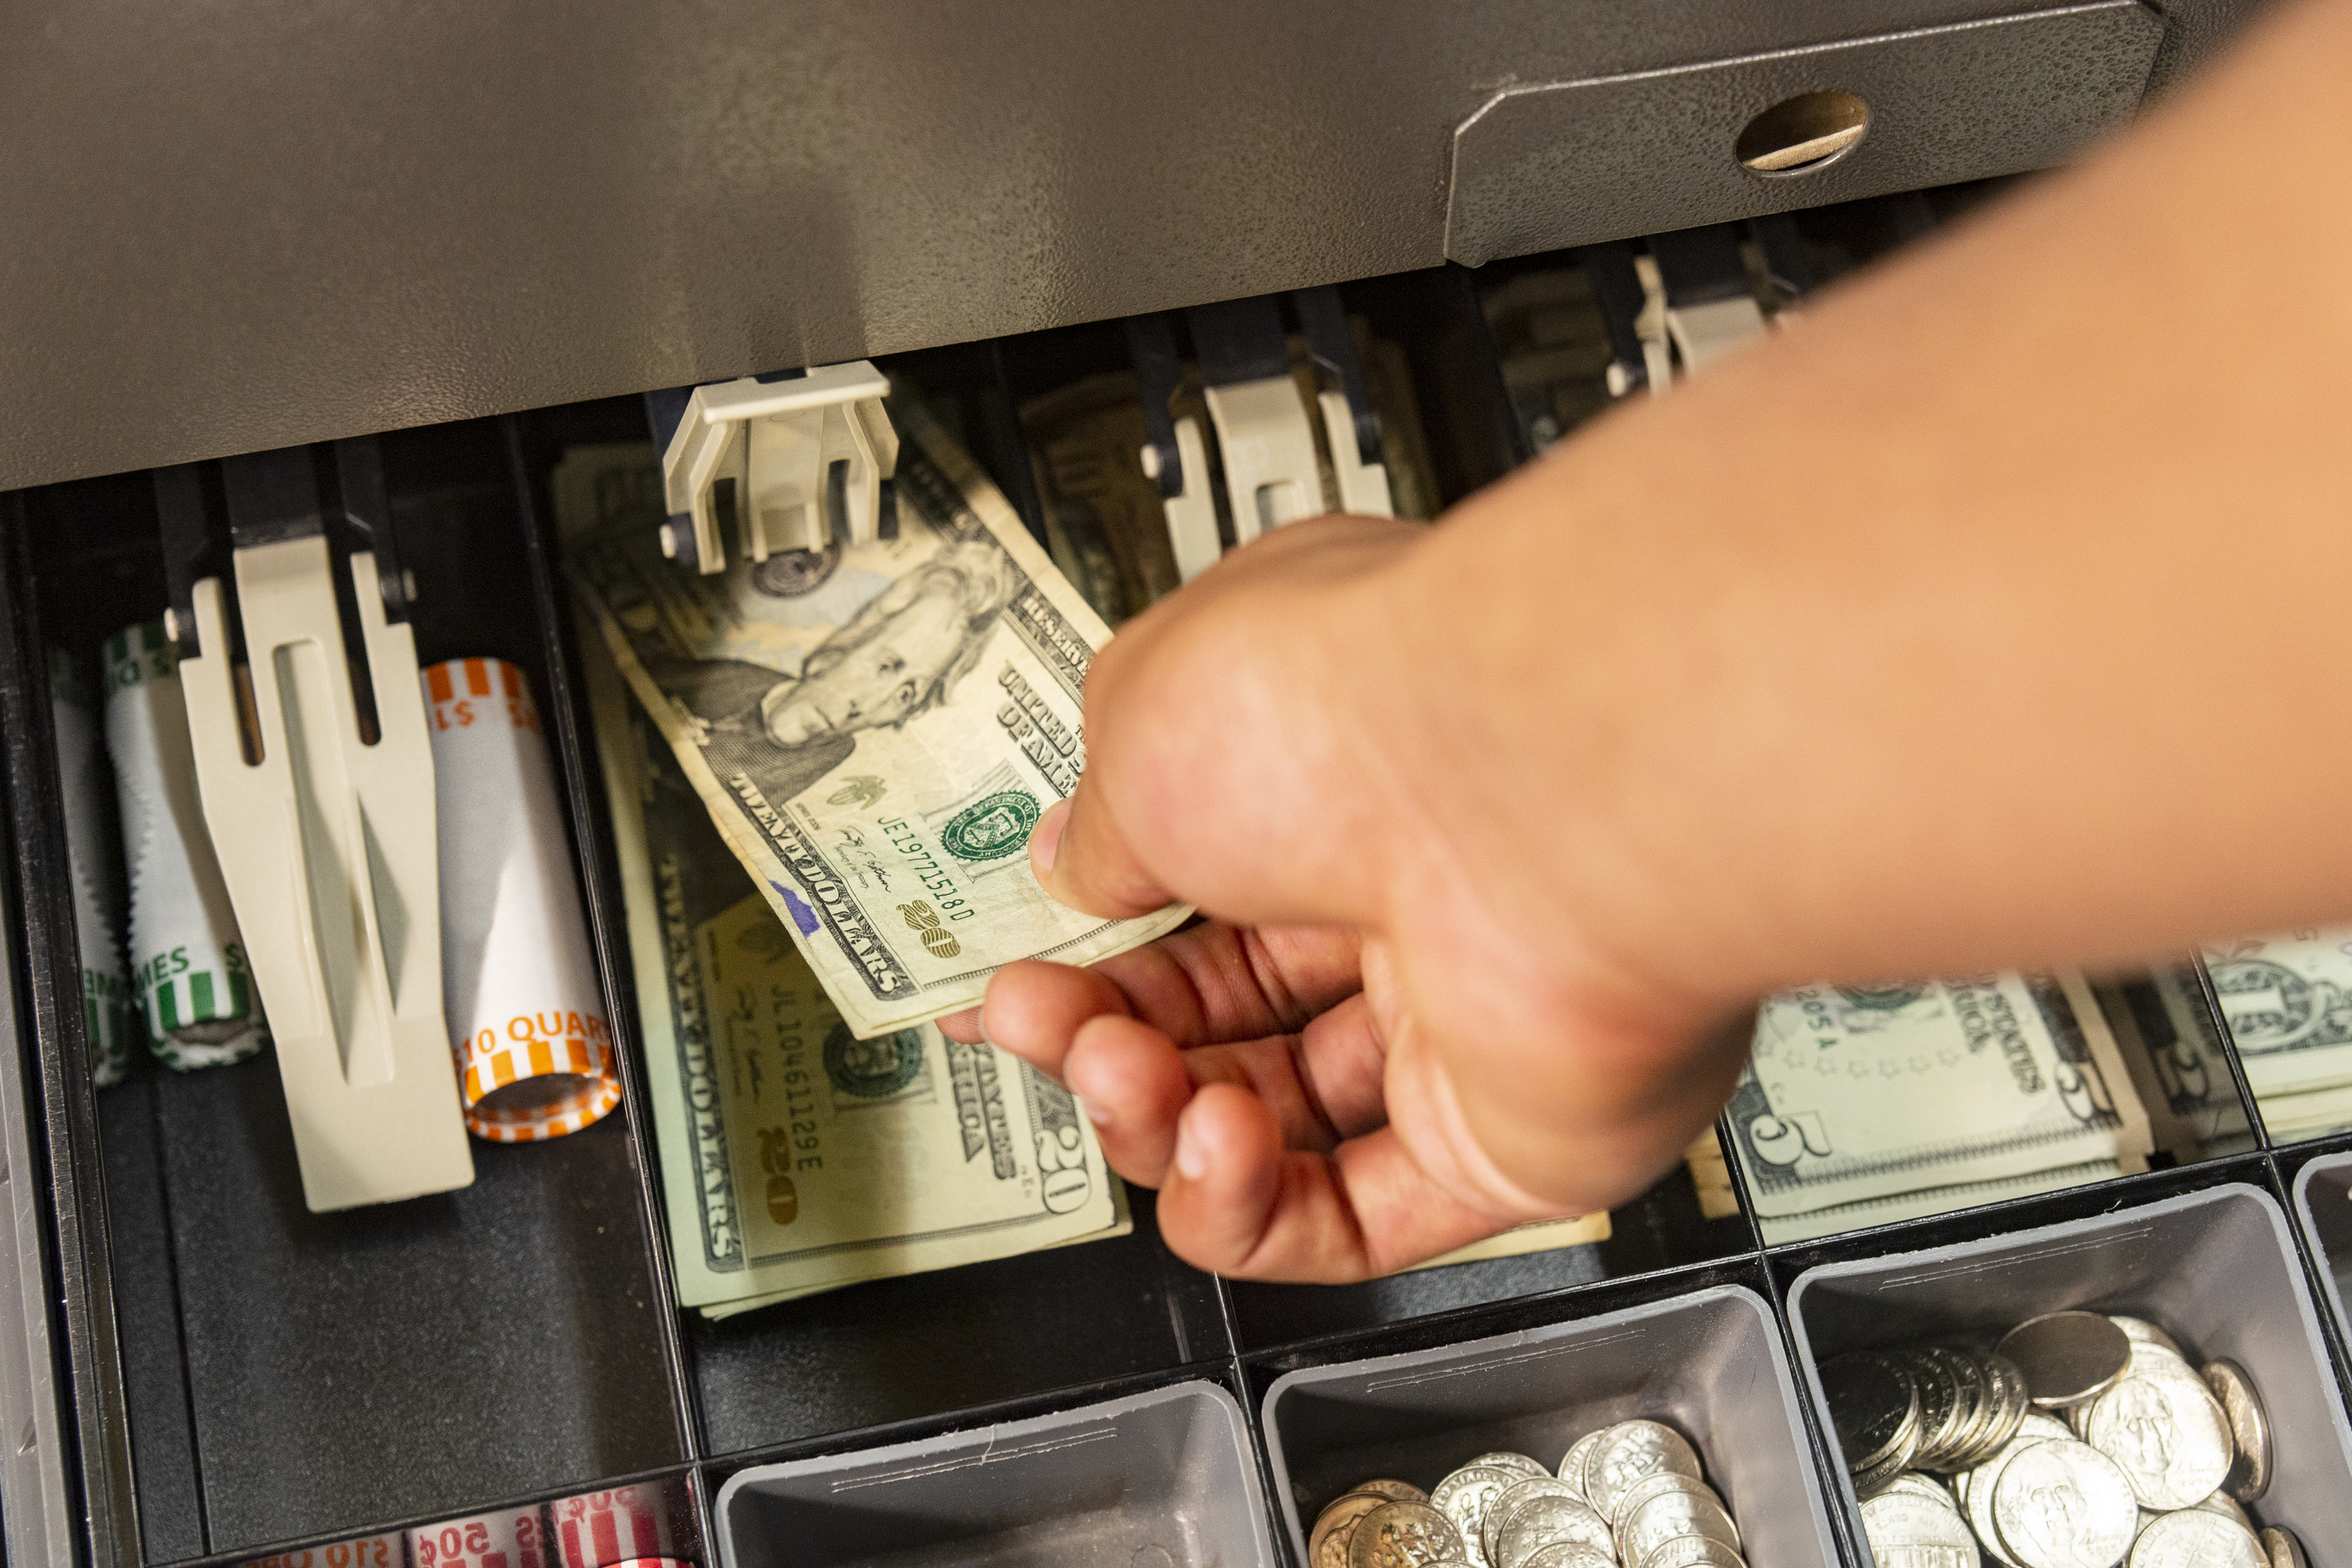 close-up of a person putting money in a till or cash draw.